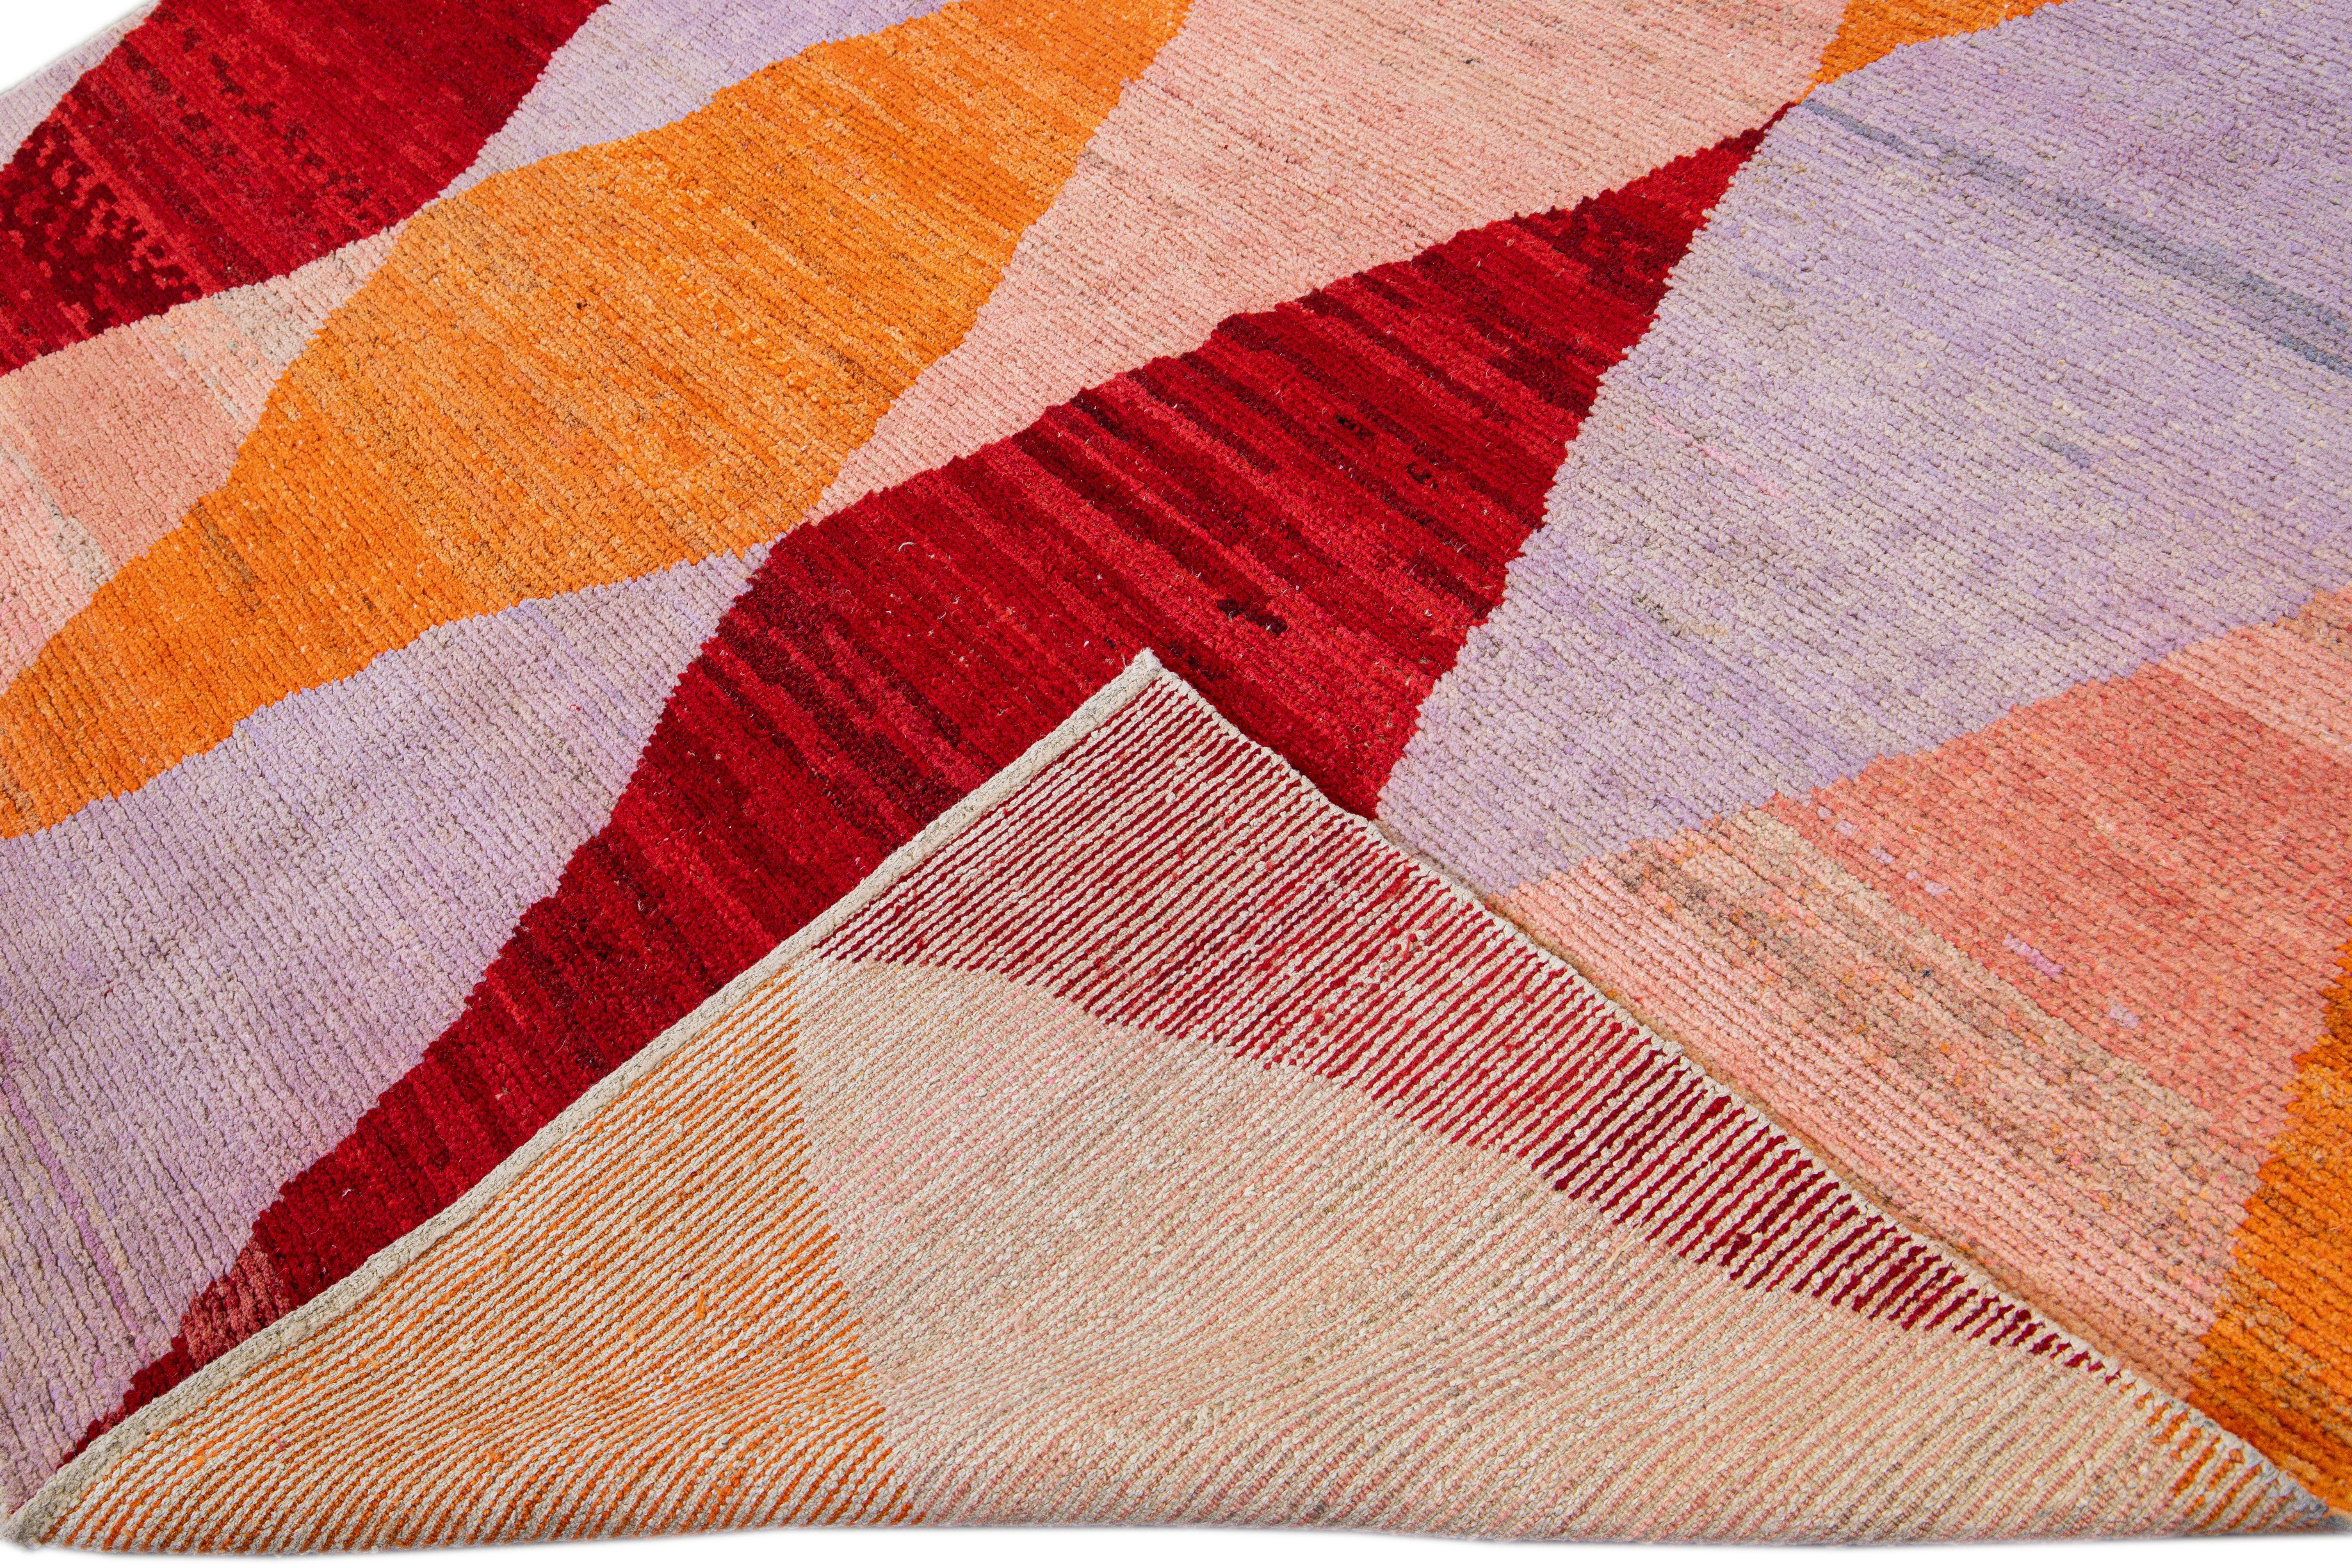 Beautiful modern Turkish wool rug with an orange, red, beige, and purple field layout in a gorgeous geometric diamond pattern design.

This rug measures: 8'6